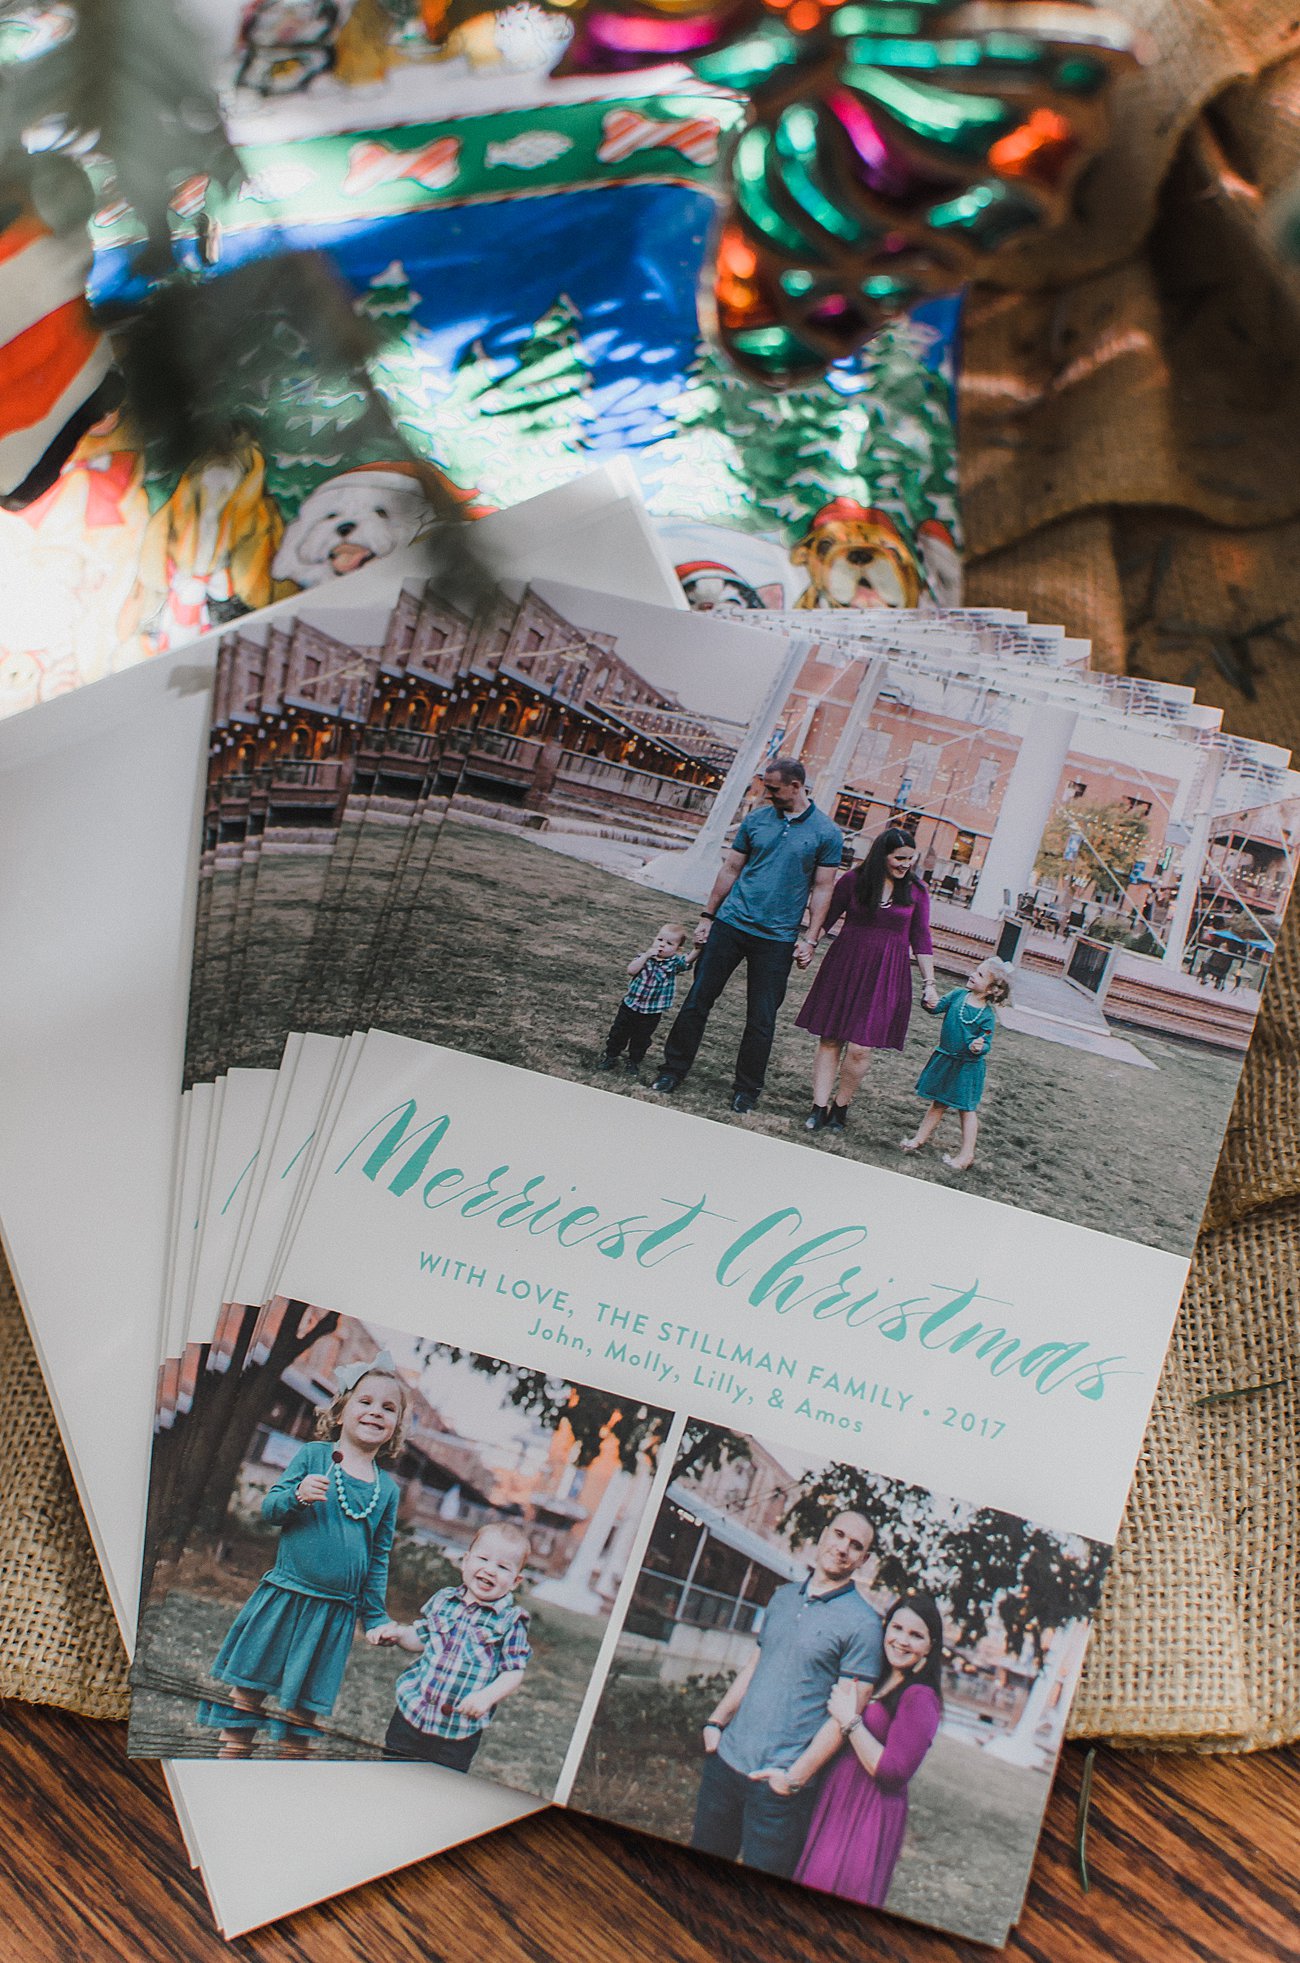 Our 2017 Christmas Cards - Minted Review (3) - This Year's Family Christmas Cards with Minted by North Carolina style blogger Still Being Molly